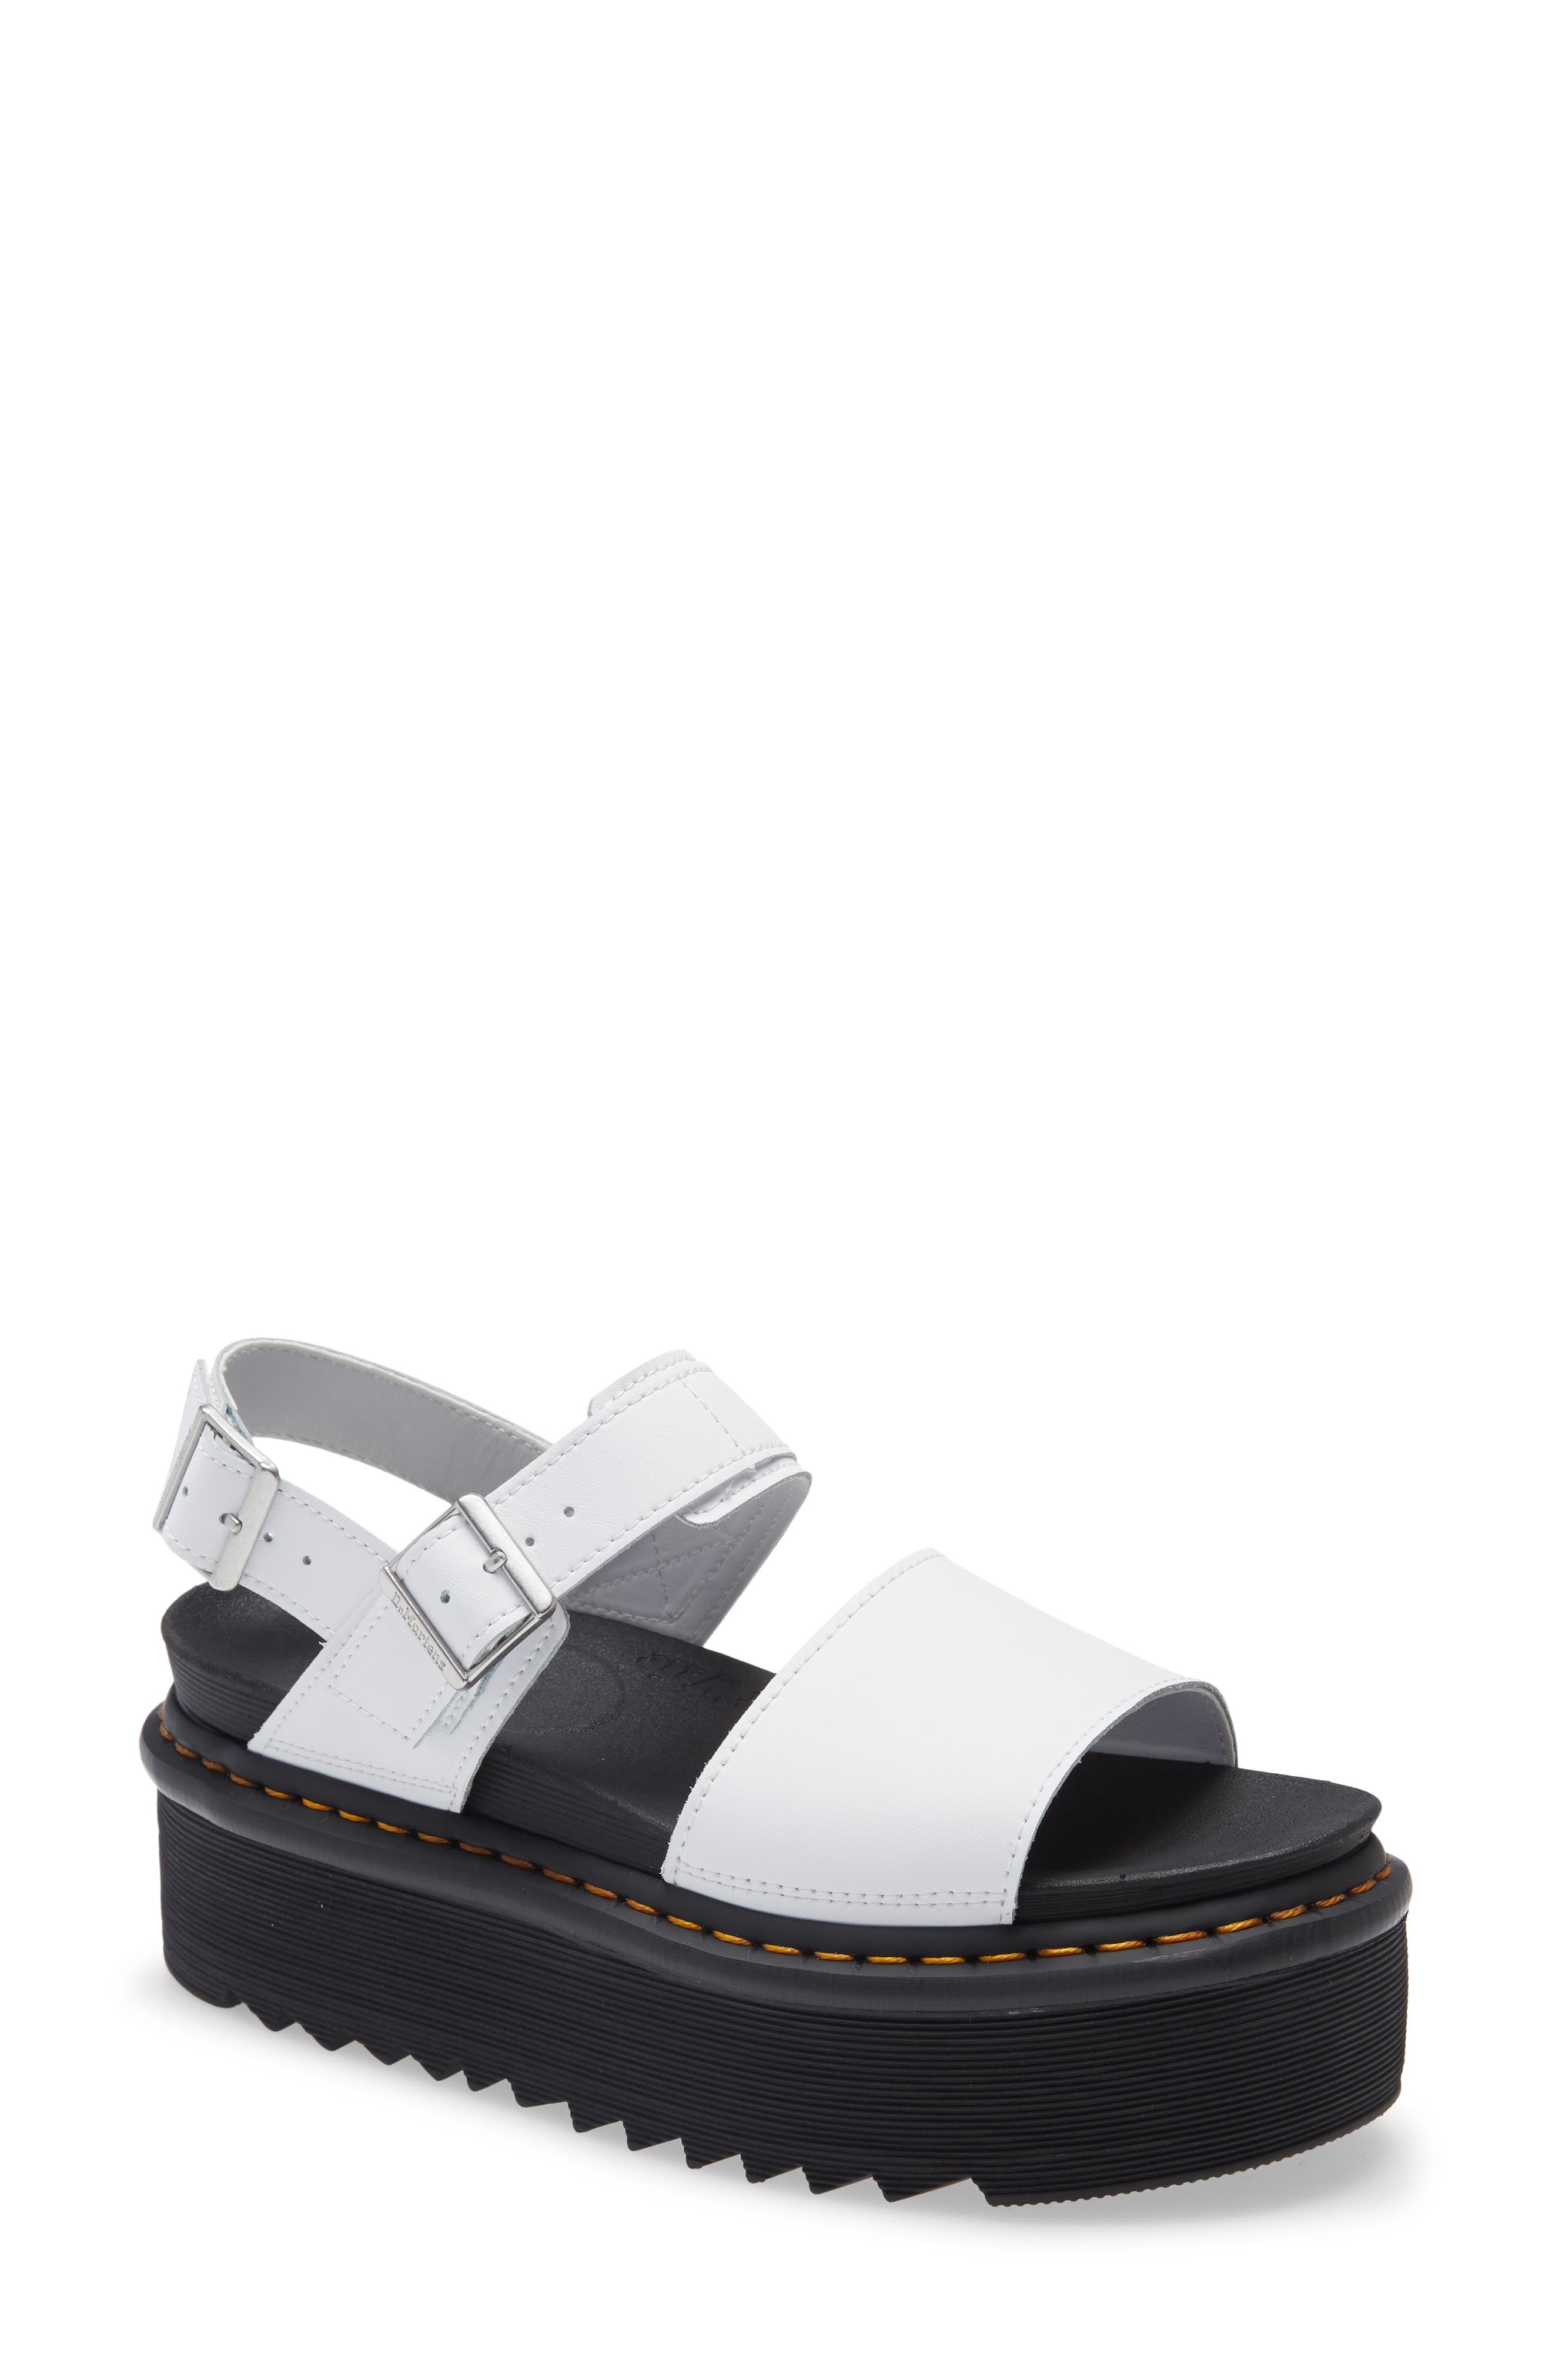 Dr. Martens Voss Quad Hydro Leather Platform Sandal in White Leather at Nordstrom, Size 10Us